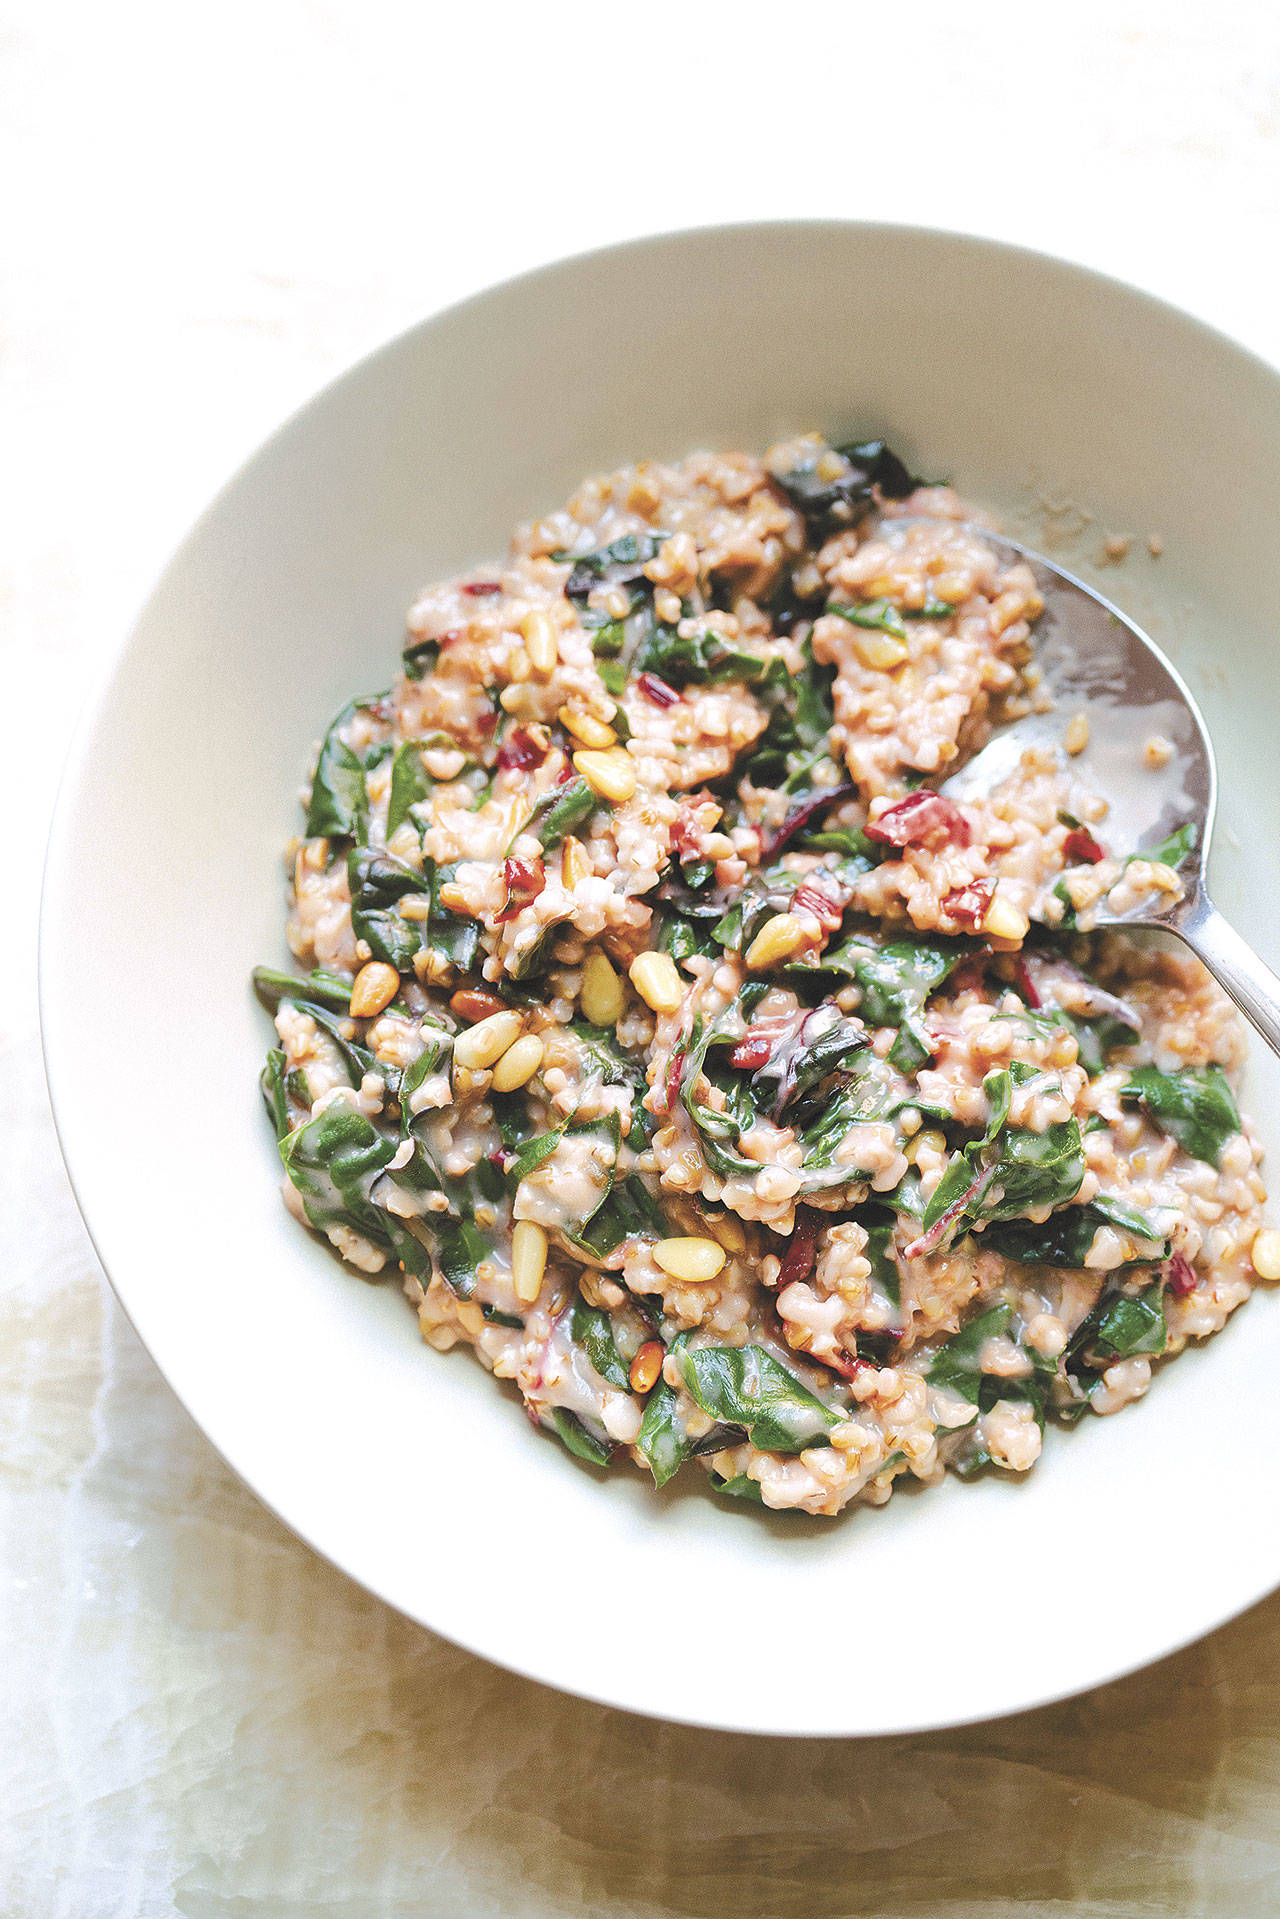 If you’re not vegetarian, creamy steel cut oats with rainbow chard and pine nuts can be topped with bacon crumbles and/or a fried or poached egg. (Masha Davydova)